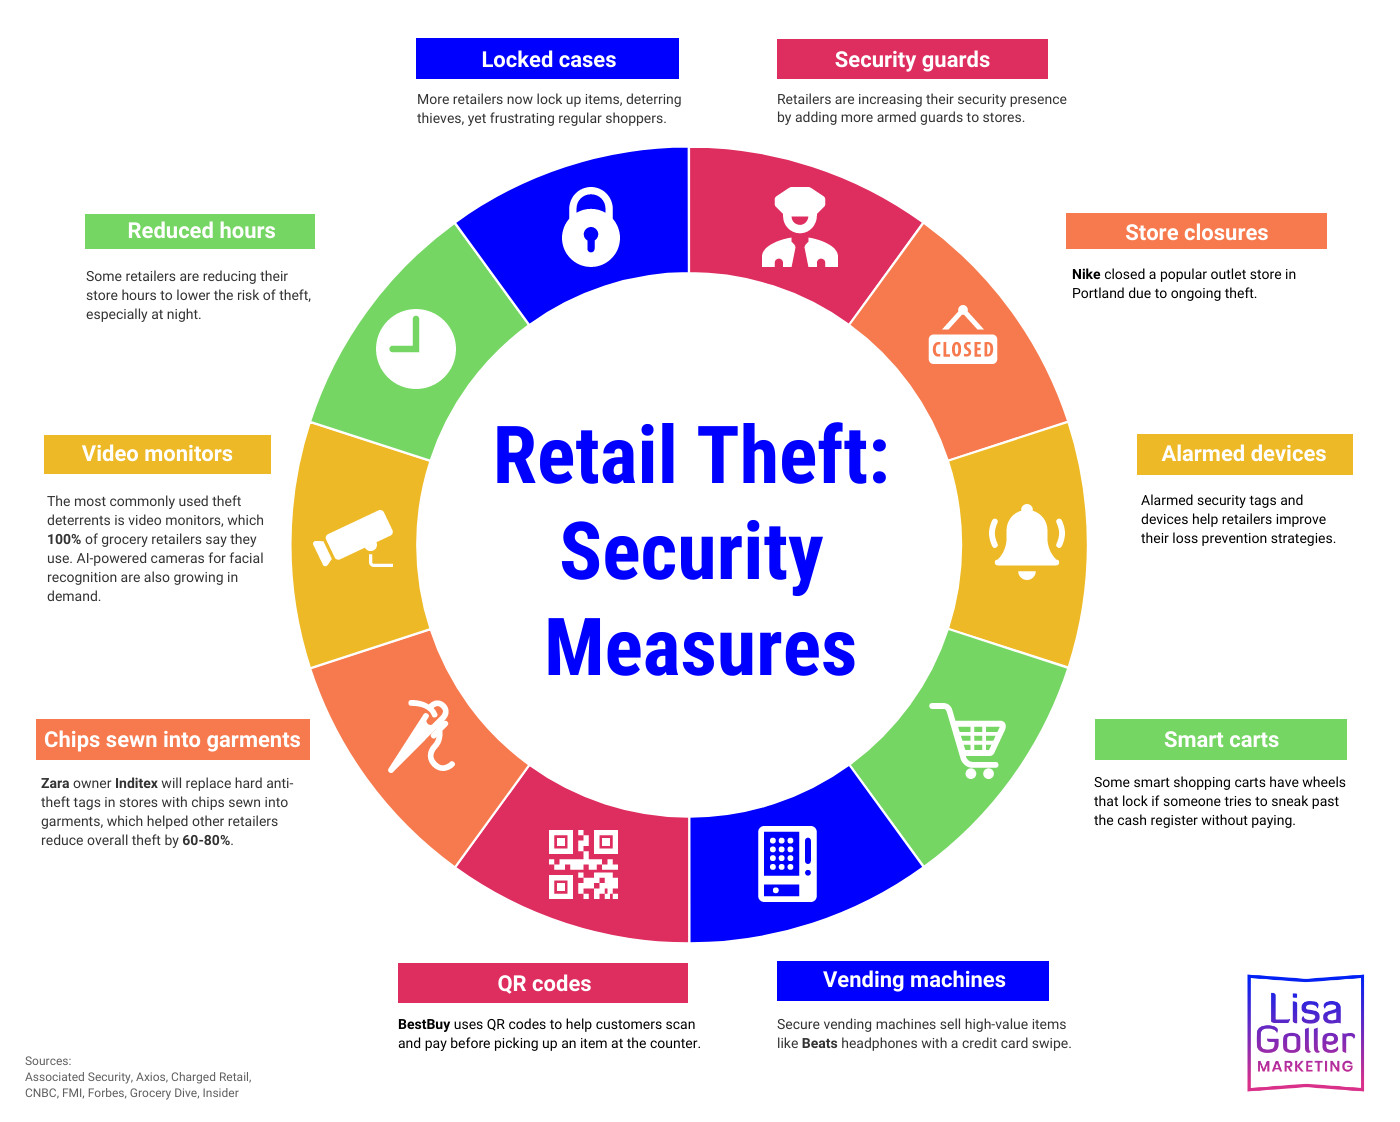 Retail Theft on the Rise Lisa Goller Marketing B2B content for